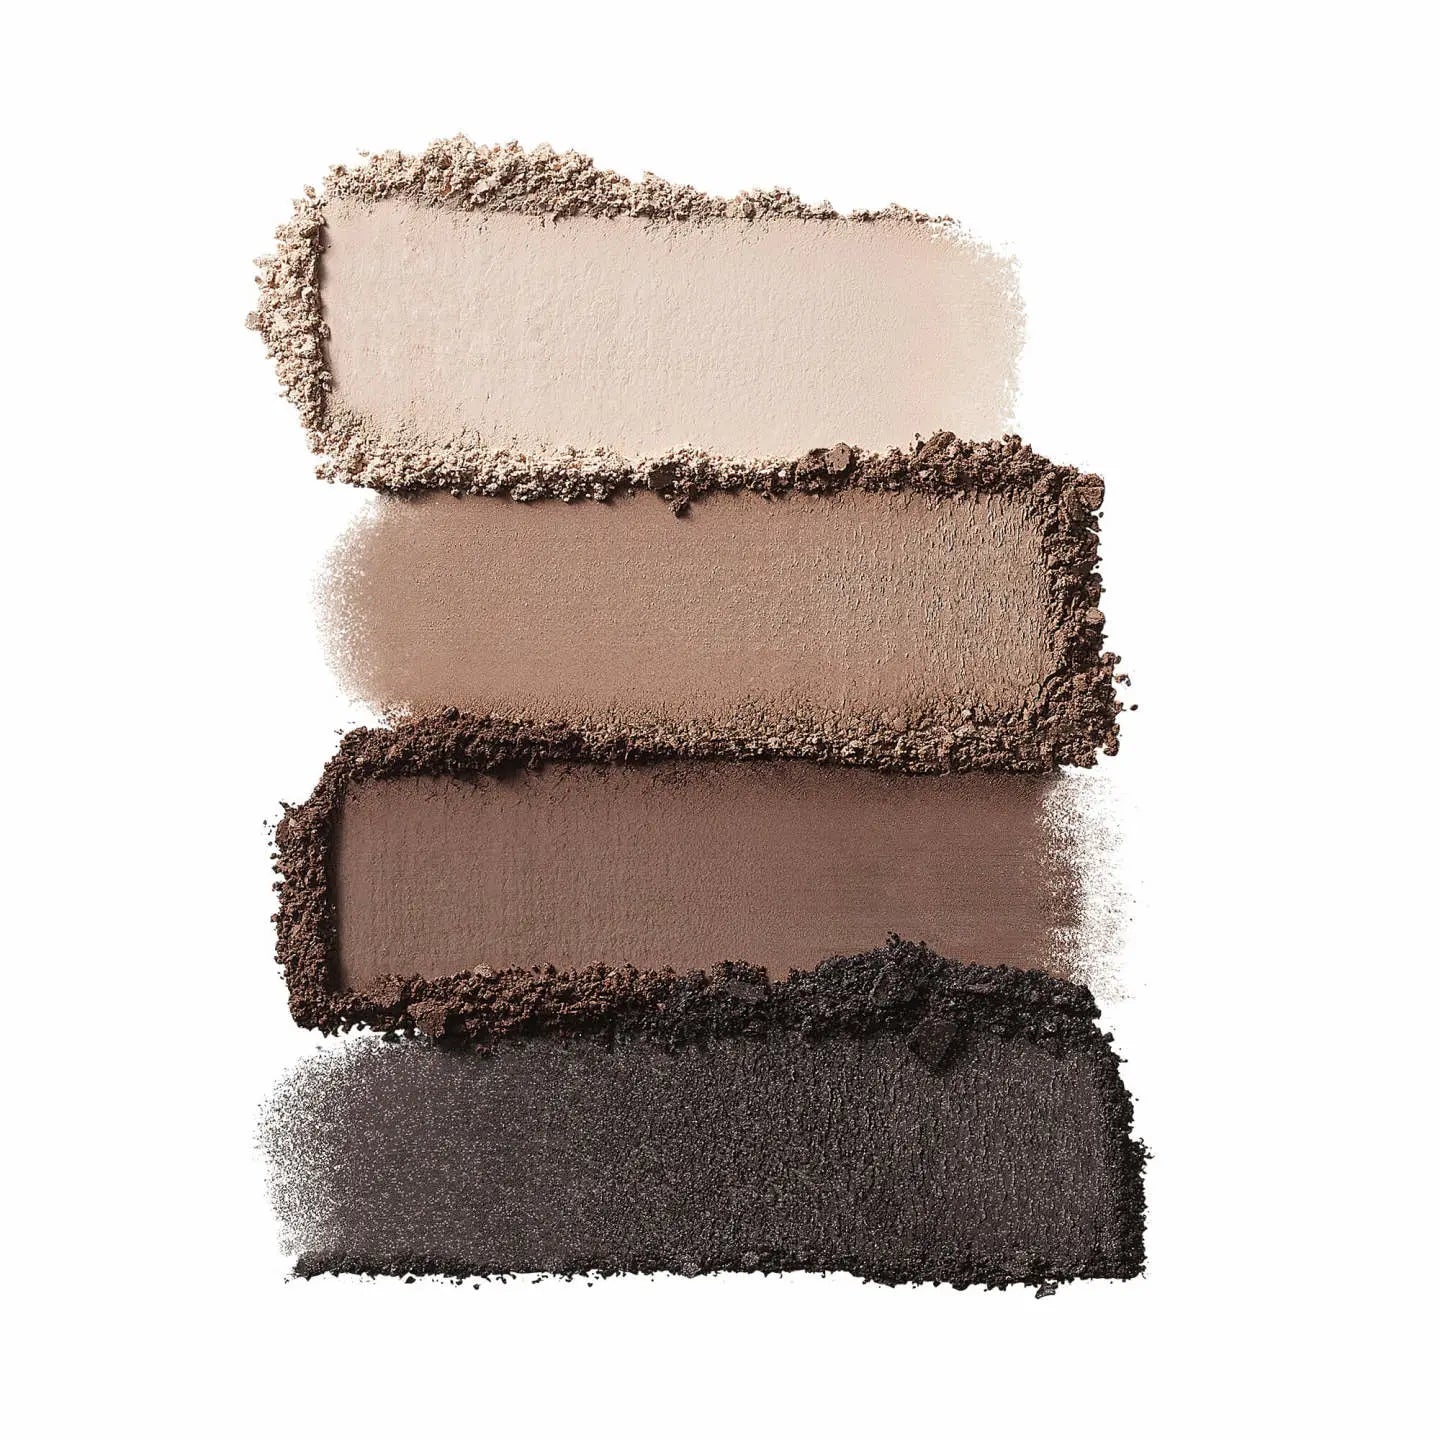 Selected: EYE SEE IN COLOR Danger Zone Multidimensional Eye Shadow Quad